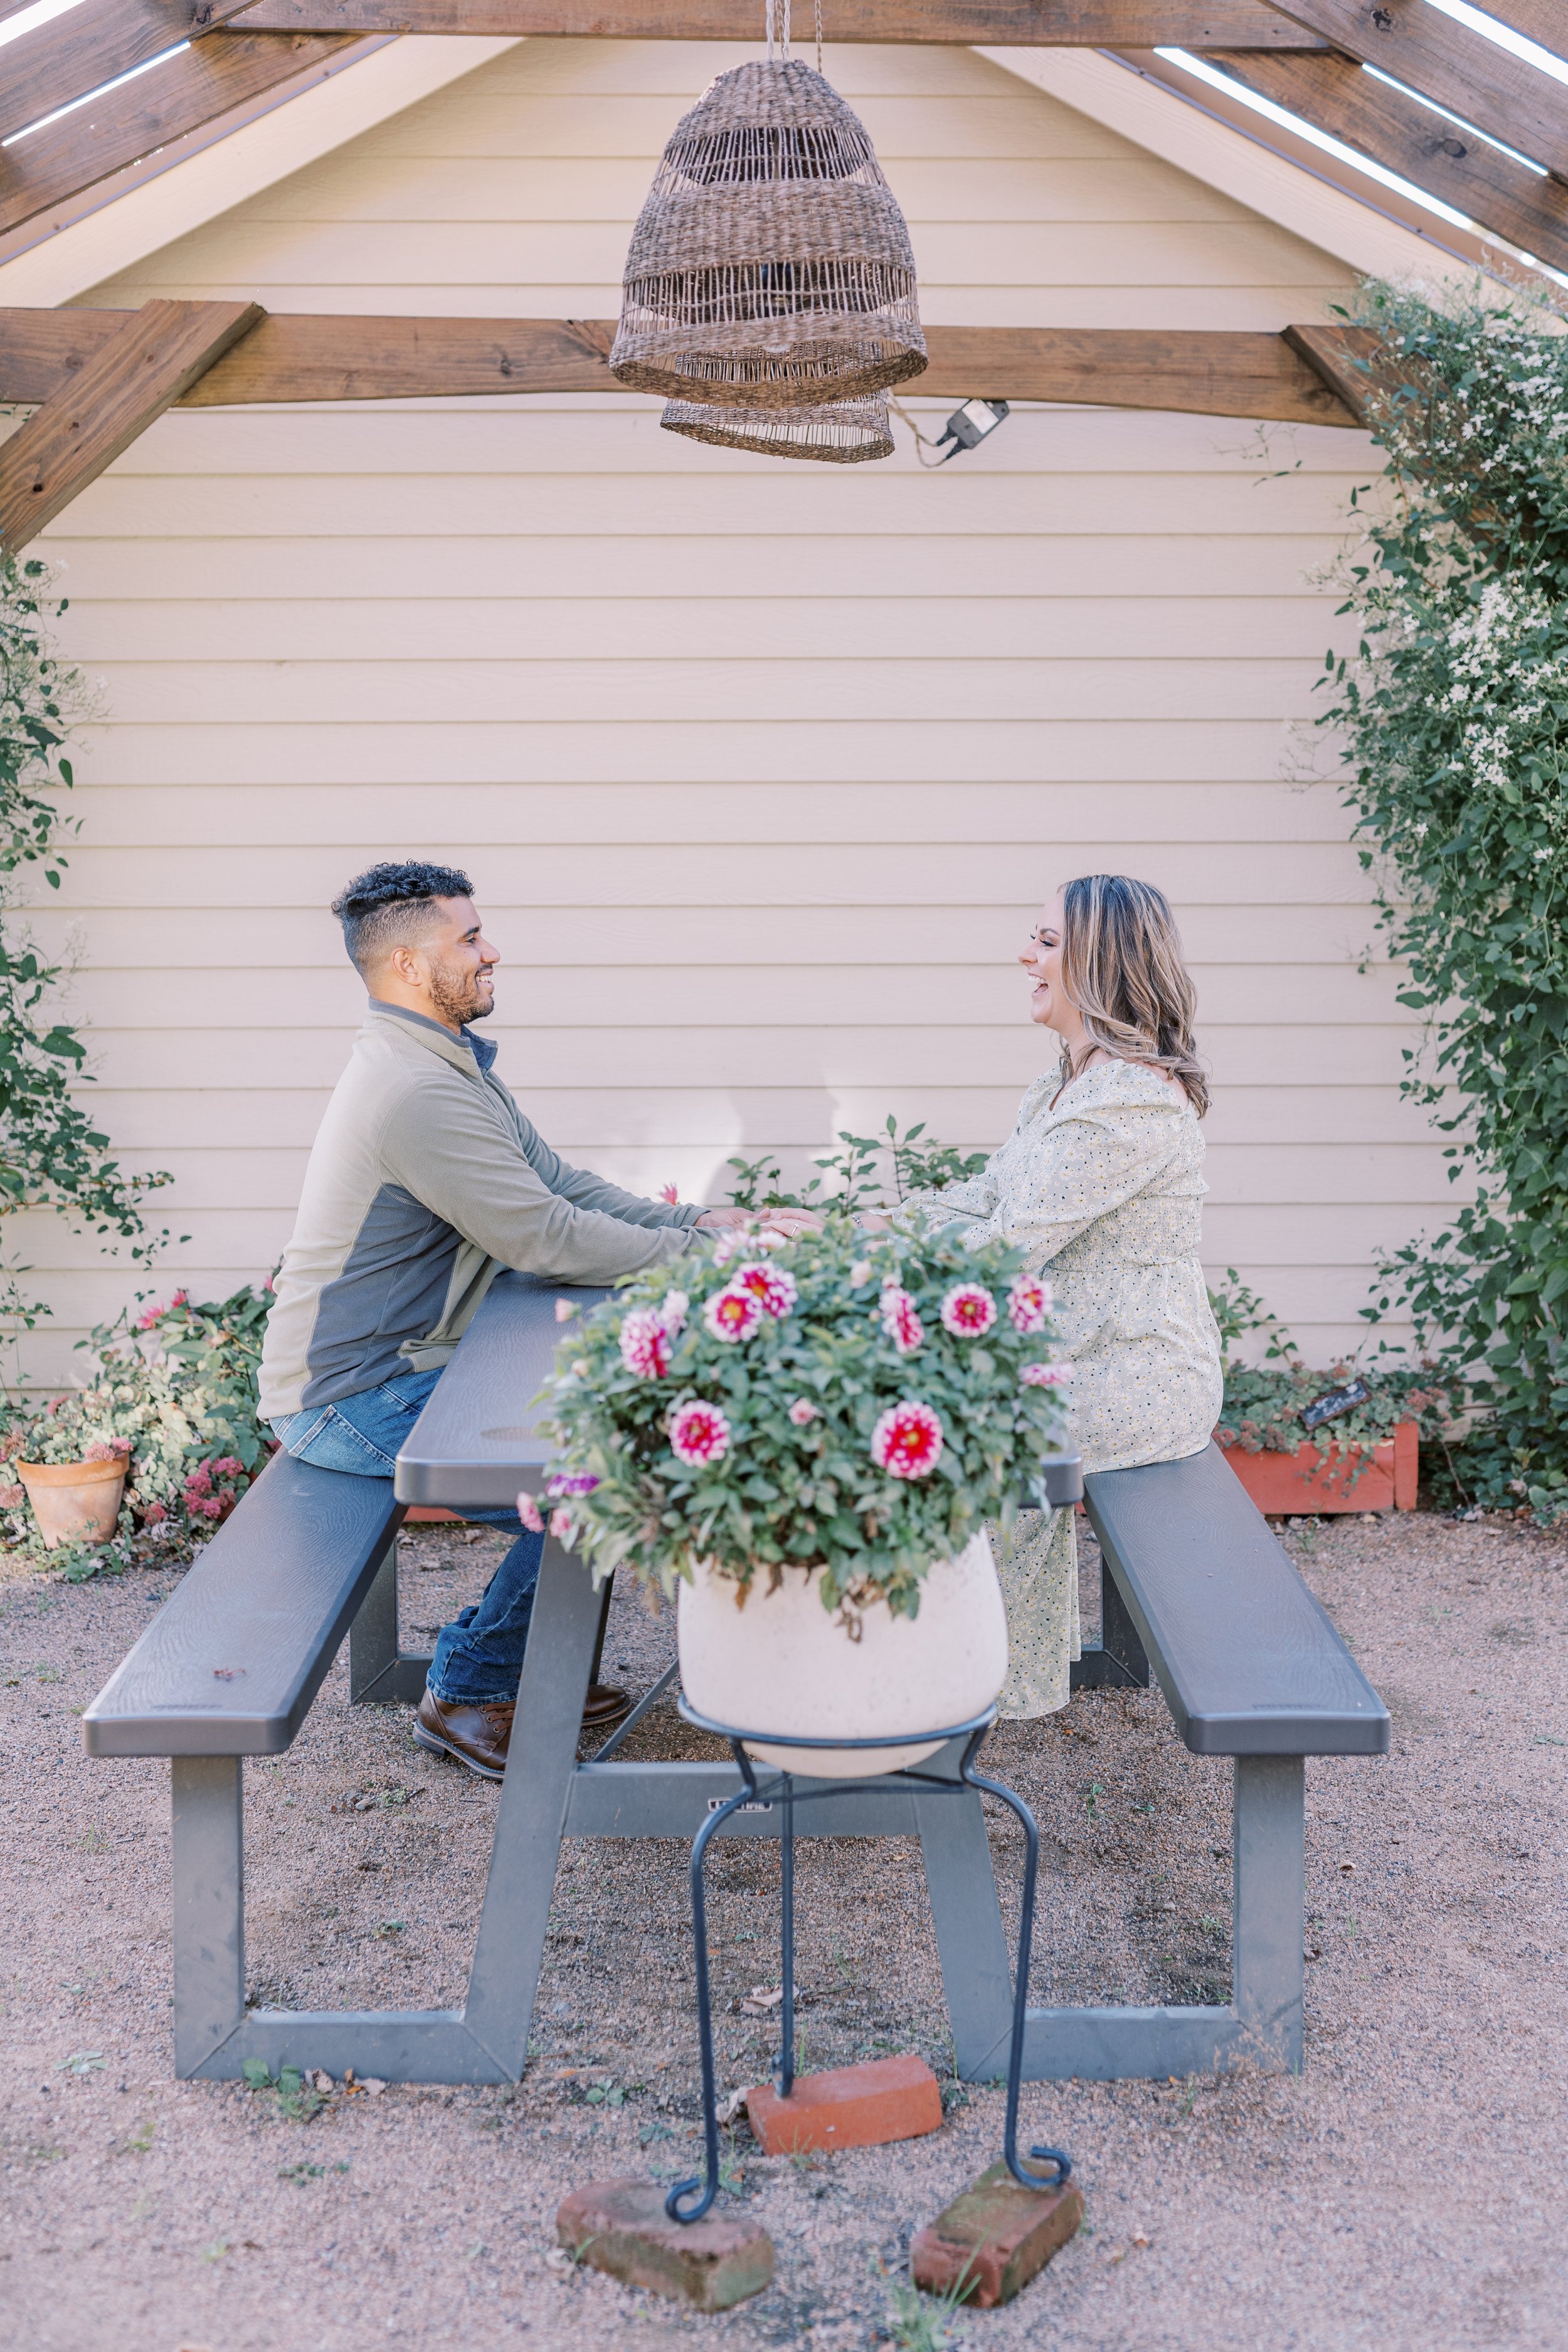 Ashley and Devin's Engagement Shoot at The Farm Bakery